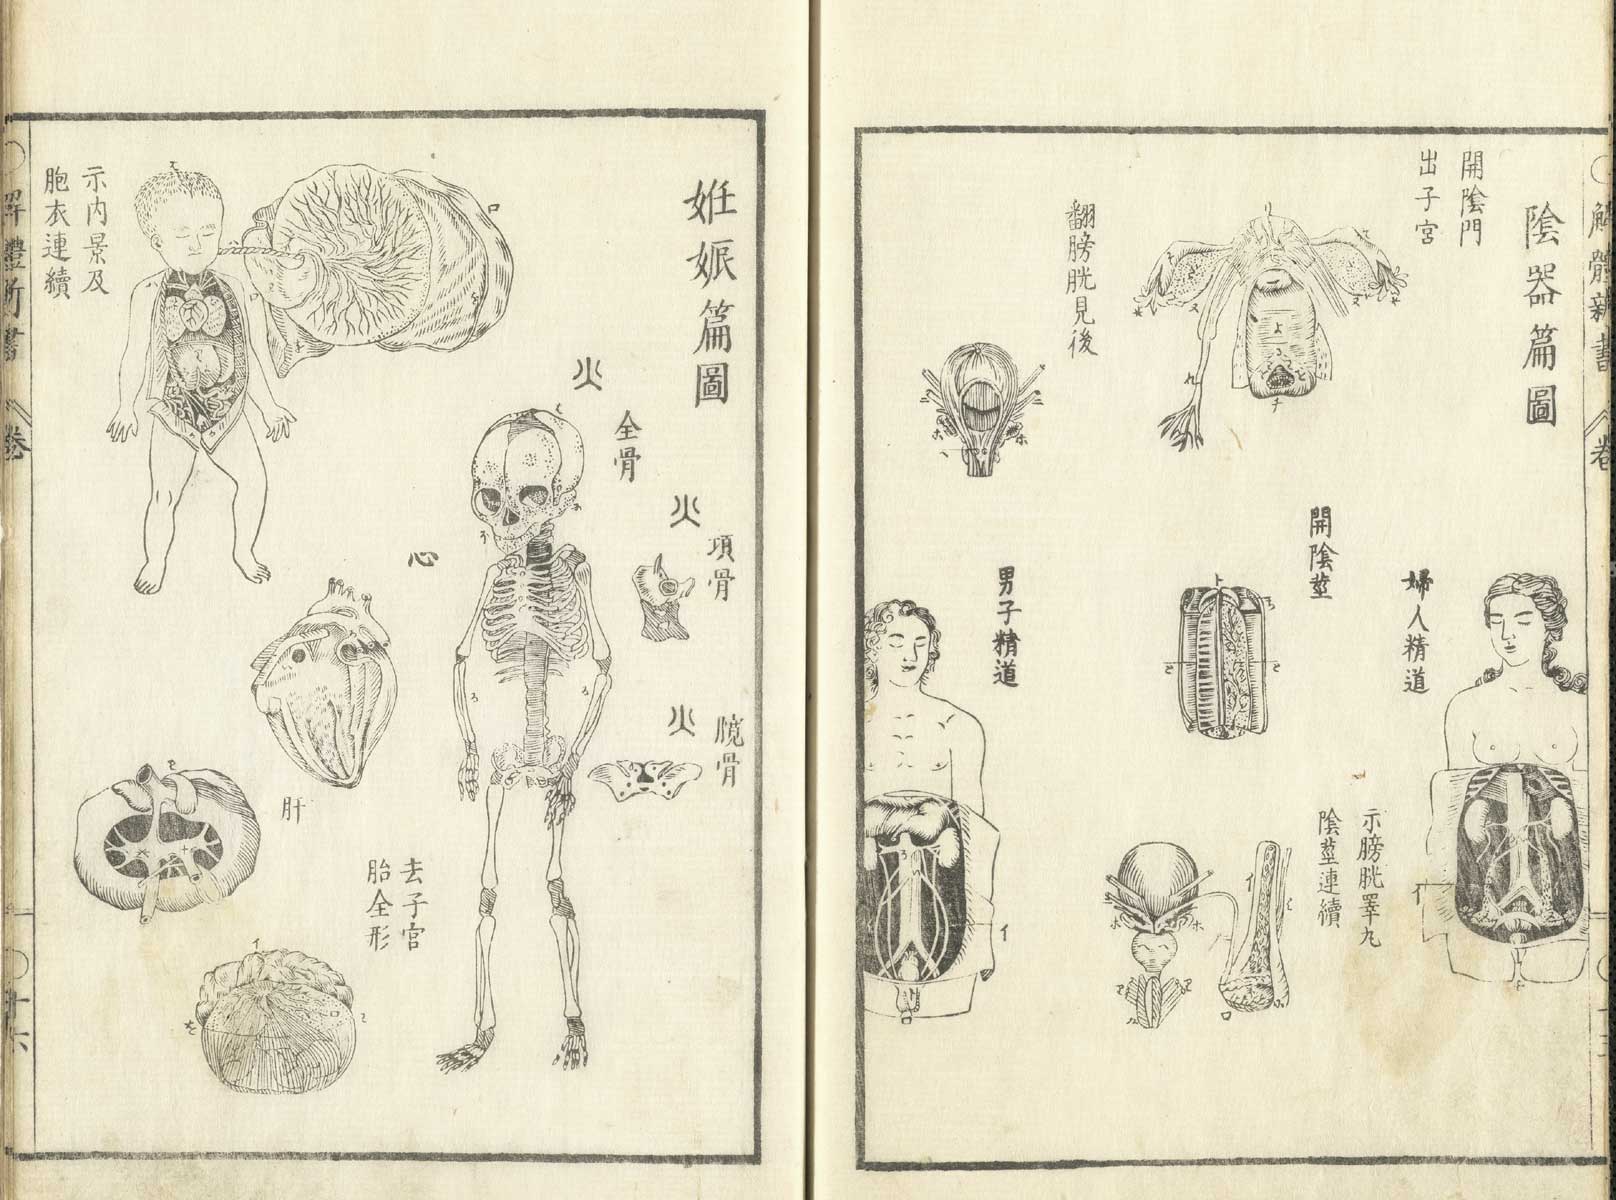 Pages 15 and 16 of Johann Adam Kulmus' Kaitai shinsho. Page 15 are six illustrations of the reproductive organs of a female corpse. Page 16 are seven illustrations of a fully formed fetus with umbilical cord and placenta attached, detailed views of the placenta and the skeleton of the baby.